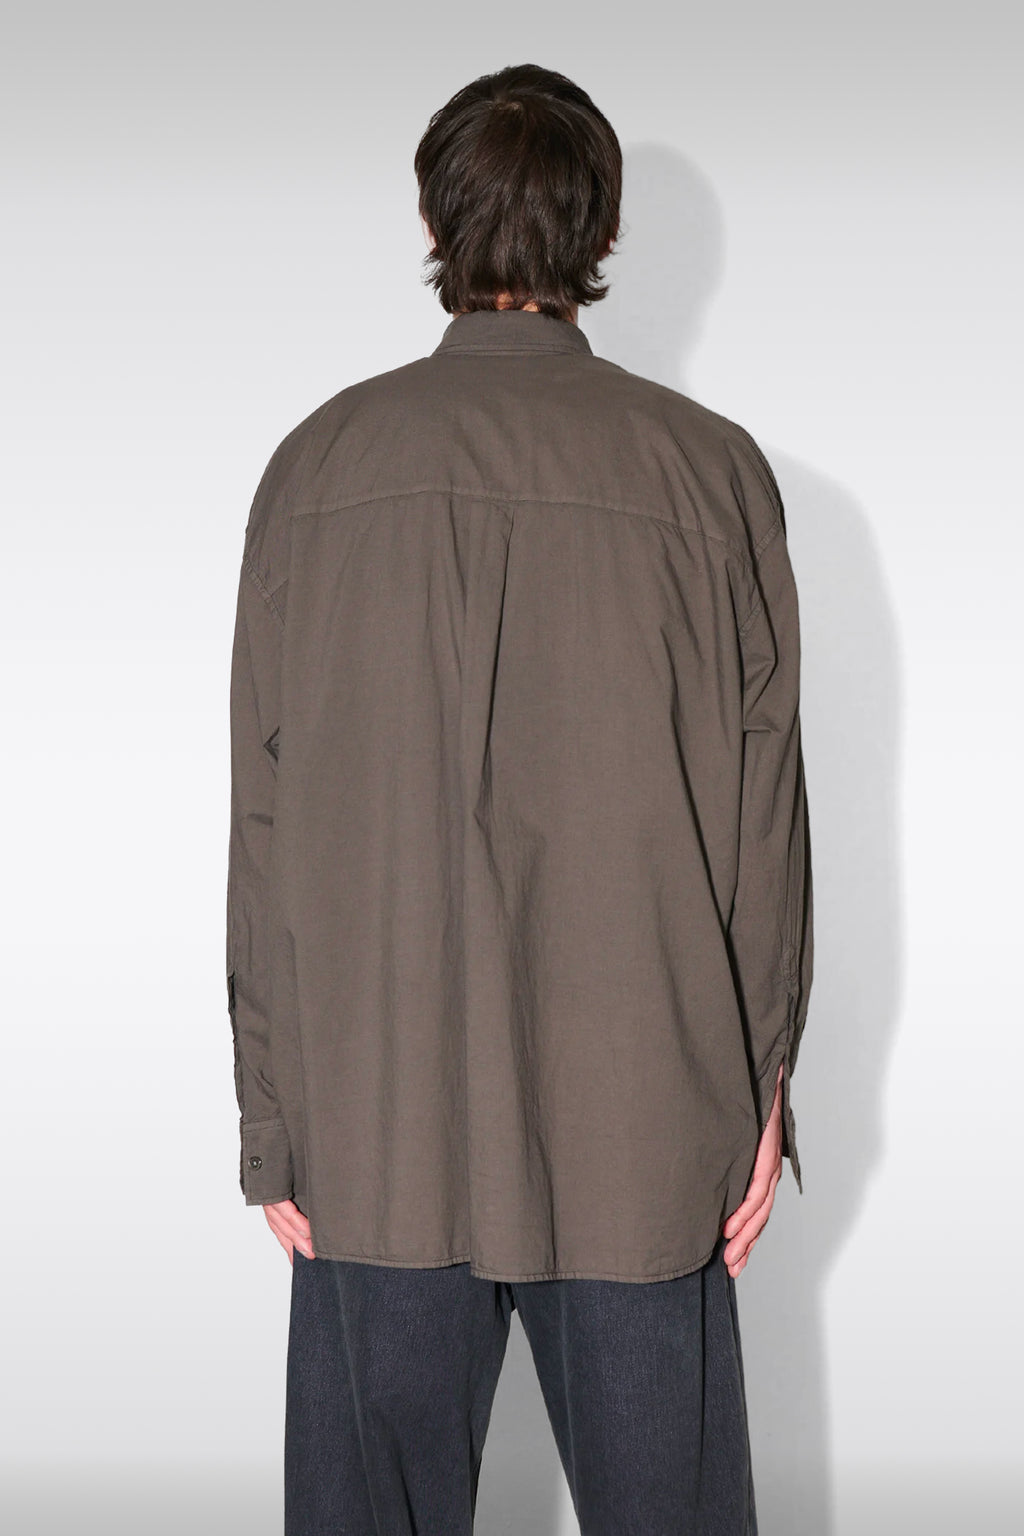 alt-image__Faded-brown-lightweight-cotton-shirt-with-long-sleeves---Borrowed-BD-Shirt